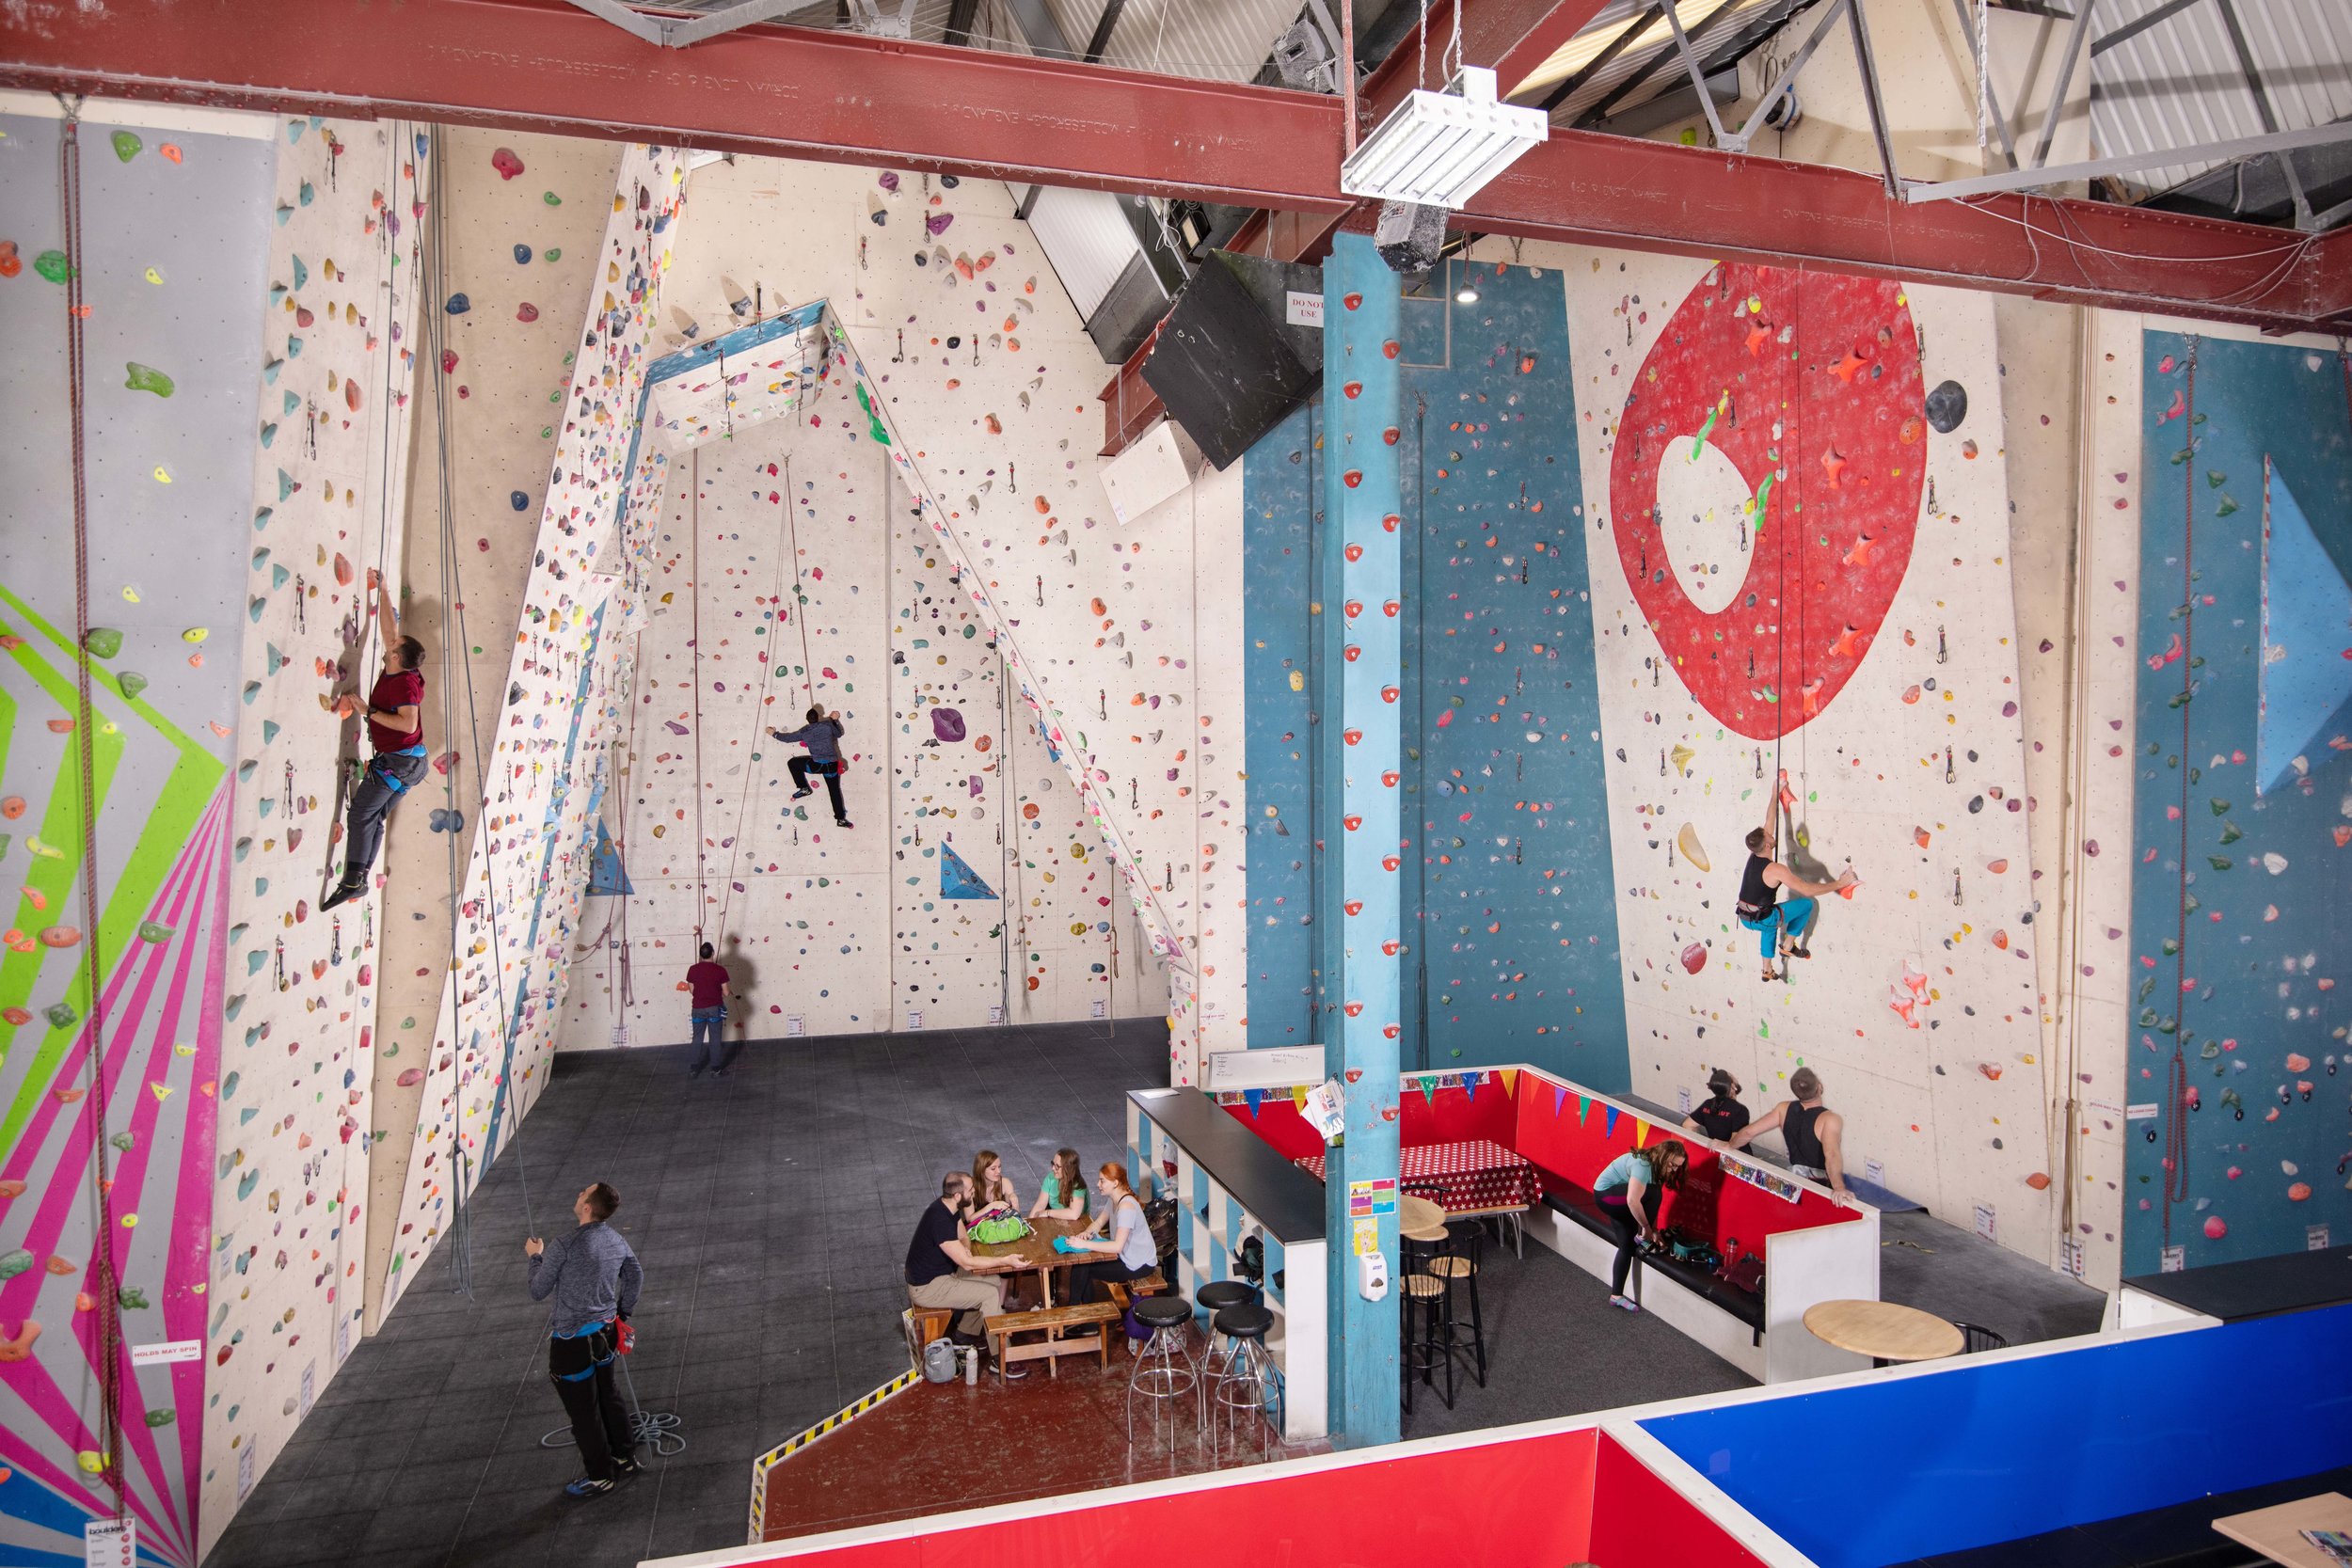 Get ready for a climbing adventure like no other! Cardiff Bay is about